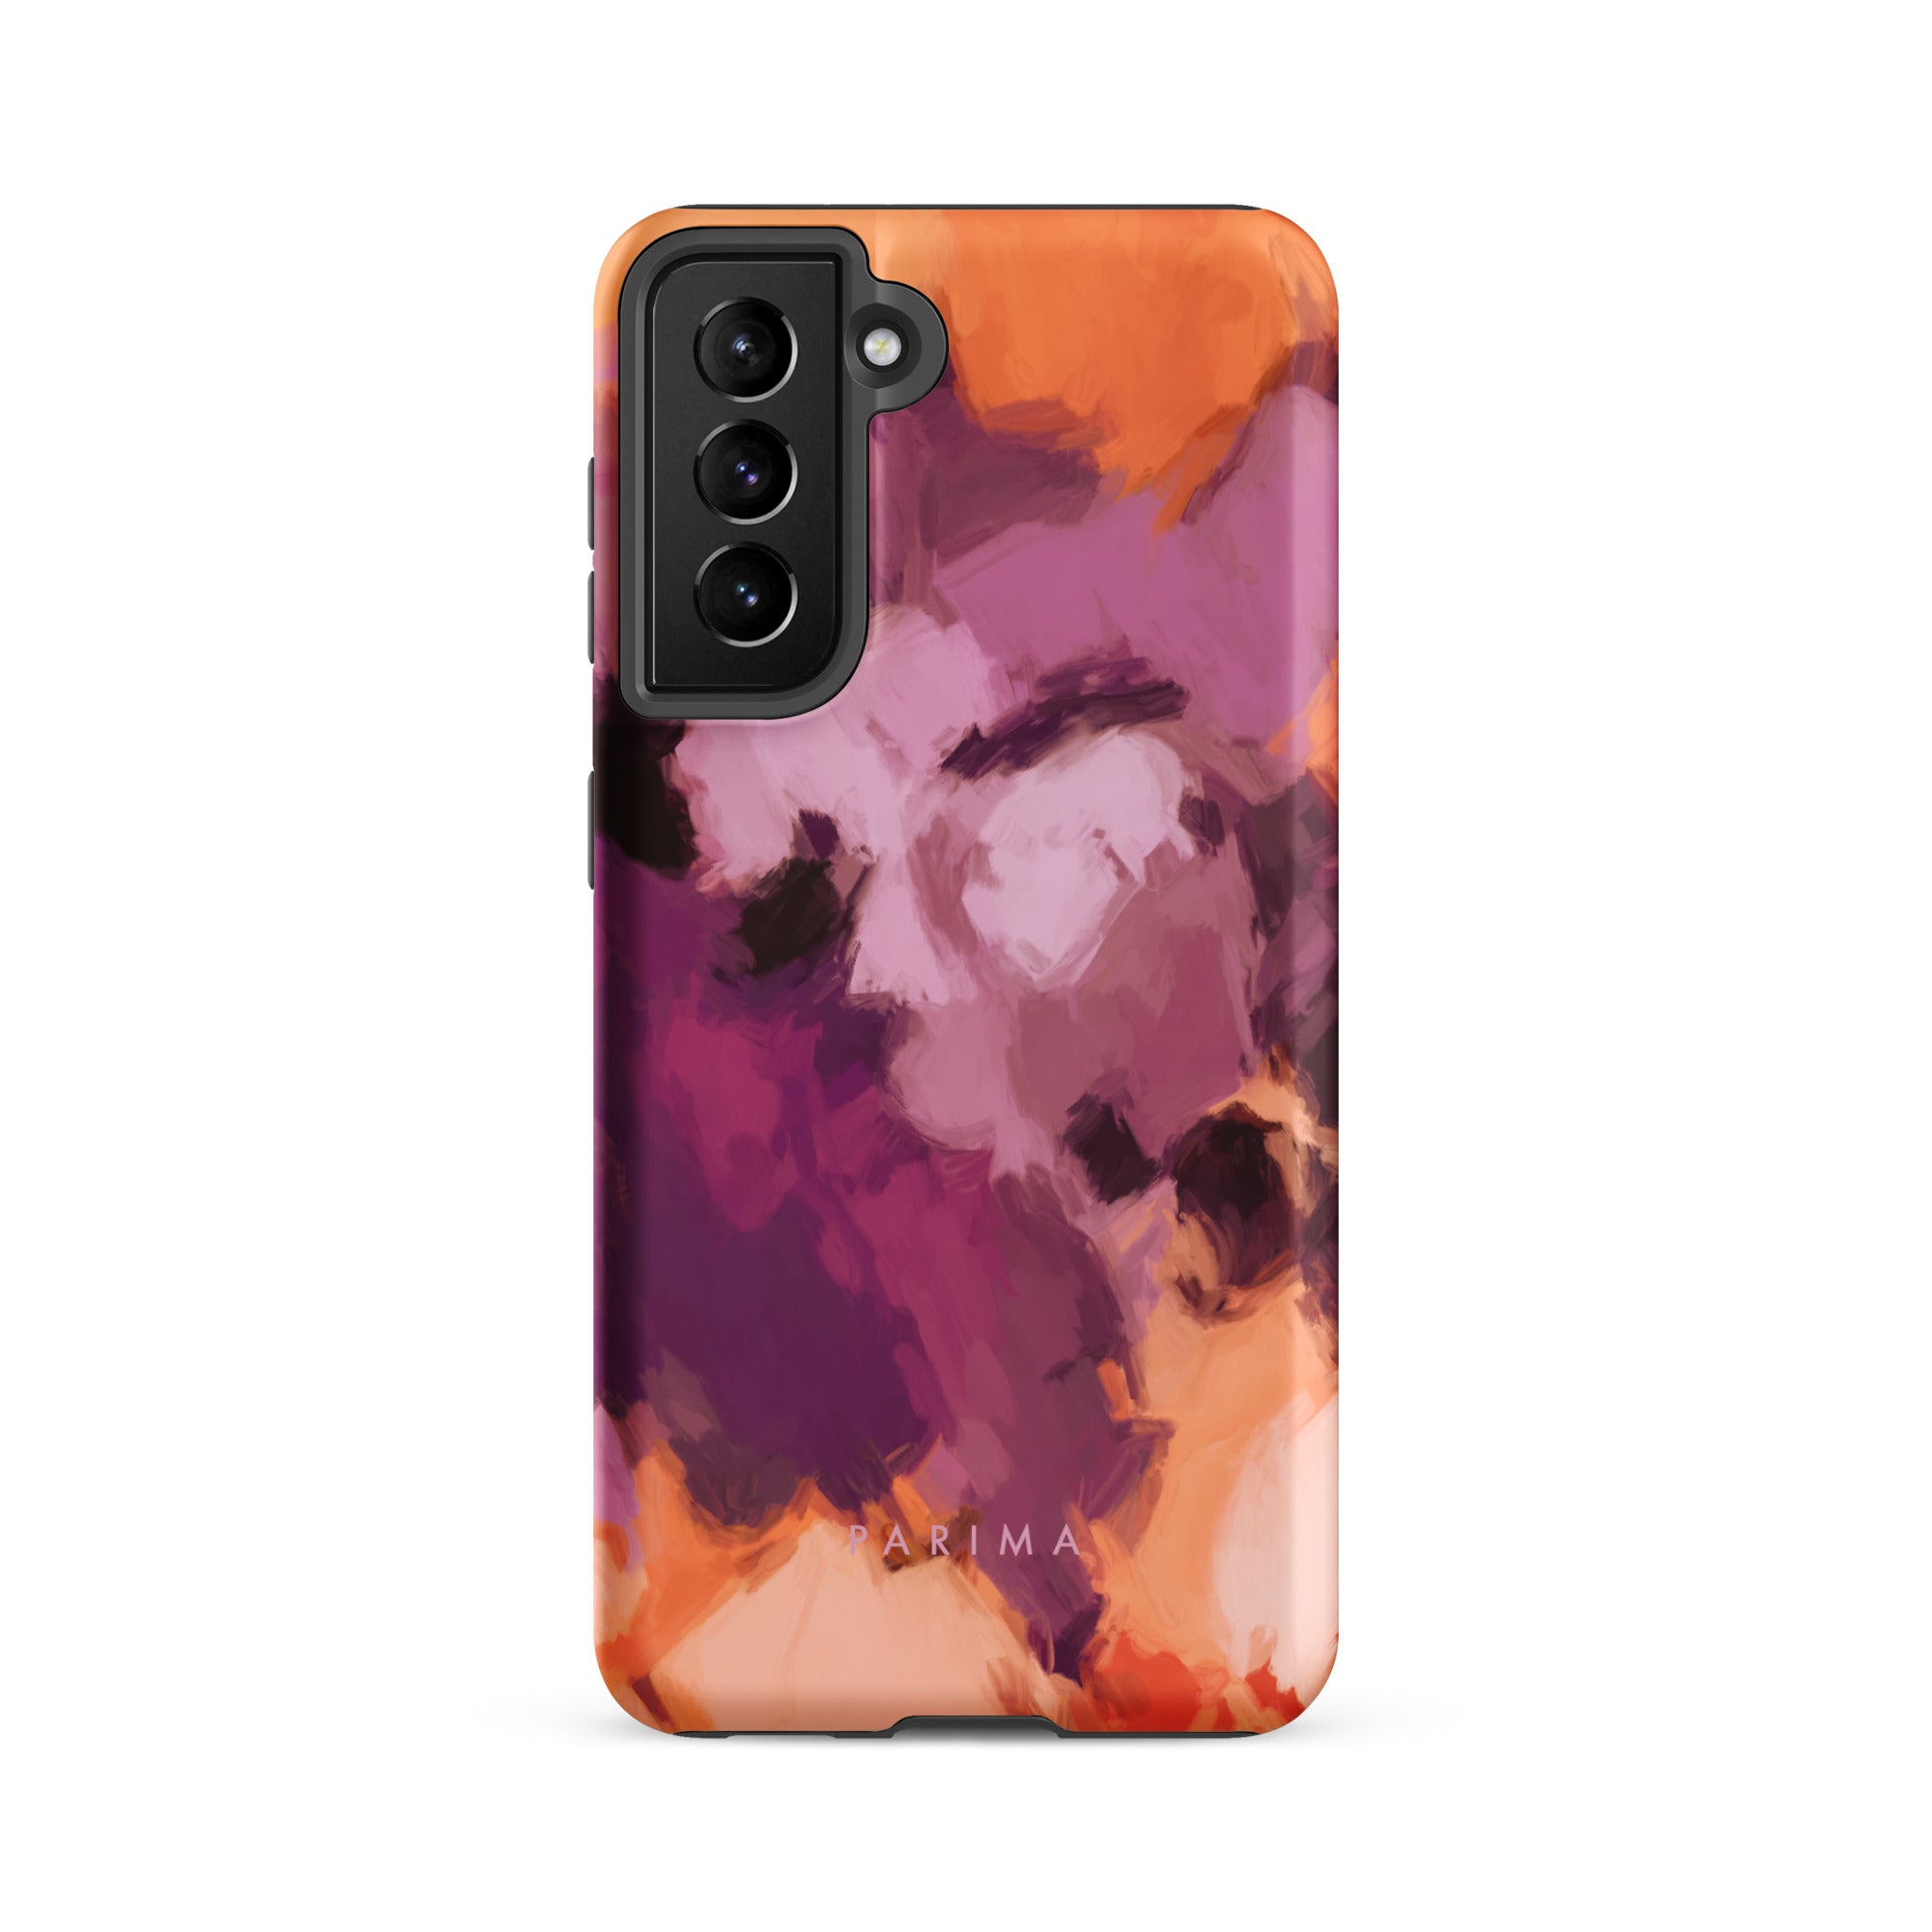 Lilac, purple and orange abstract art on Samsung Galaxy S21 FE tough case by Parima Studio